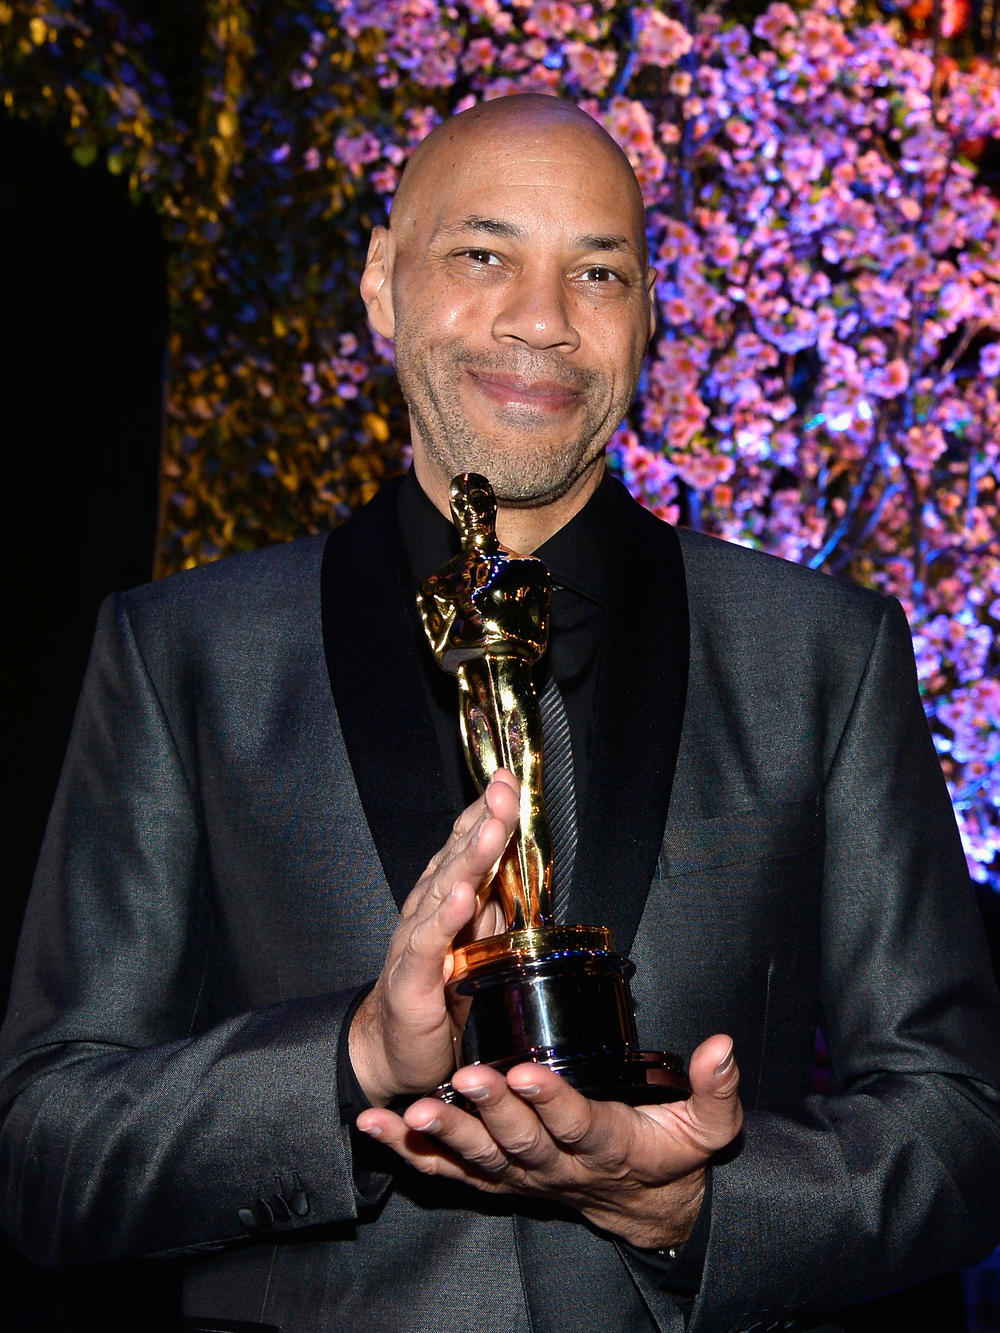 John Ridley attends the Oscars Governors Ball in 2014.